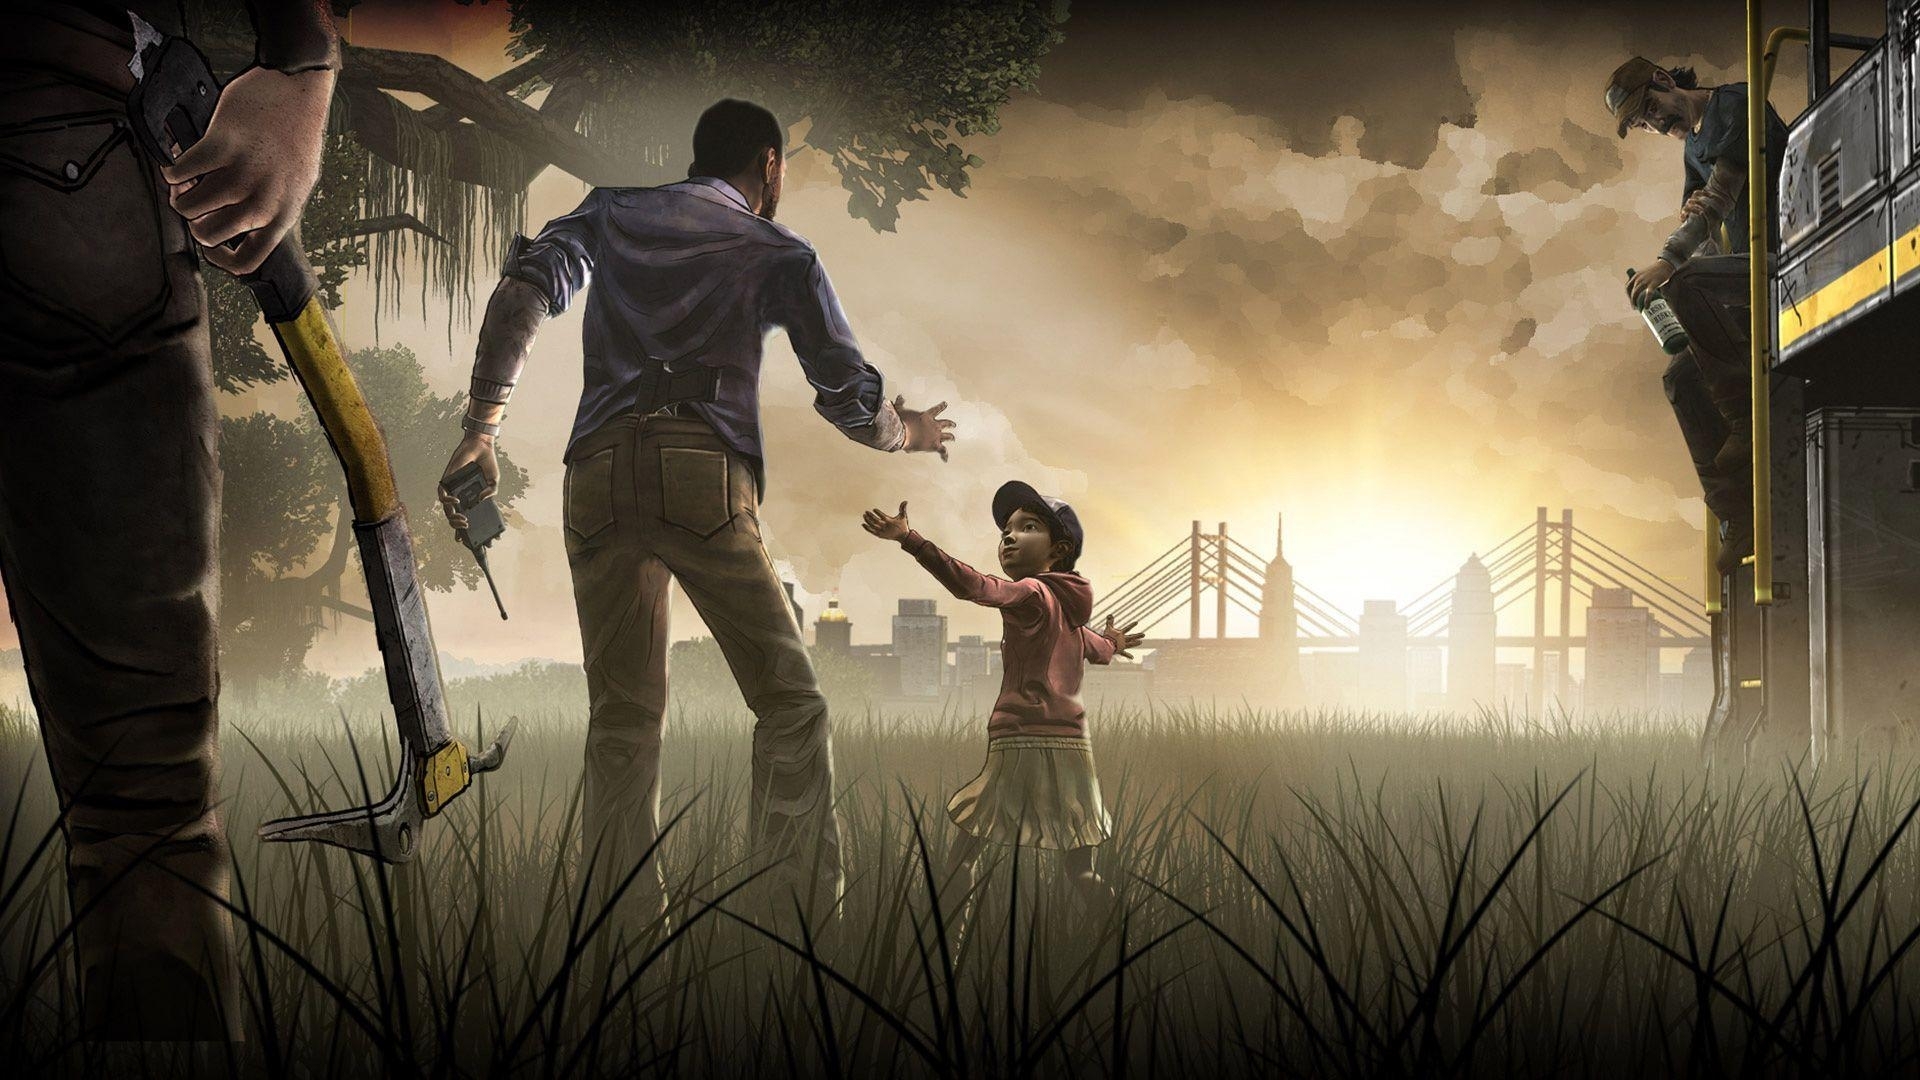 10 Latest The Walking Dead Game Wallpapers FULL HD 1920×1080 For PC Background